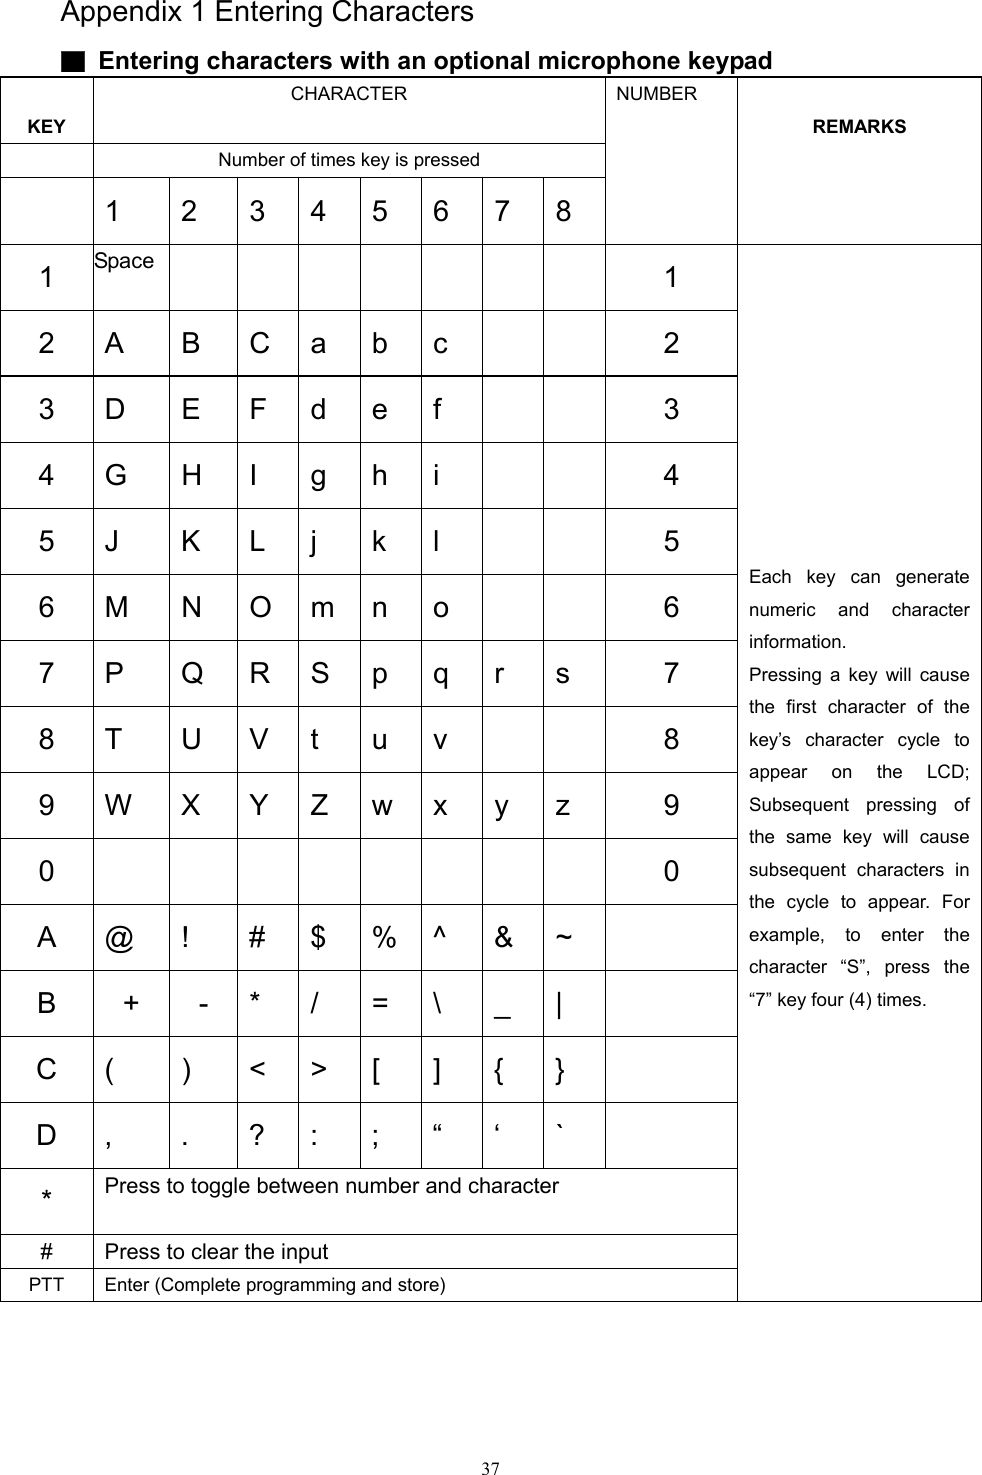  37  Appendix 1 Entering Characters   ▇  Entering characters with an optional microphone keypad  KEY CHARACTER     Number of times key is pressed  1  2  3 4 5 6 7 8 NUMBER    REMARKS 1   Space           1 2 A    B  C  a  b  c      2 3  D    E  F  d  e  f      3 4  G    H  I  g  h  i      4 5  J    K  L  j  k  l      5 6  M    N  O  m  n  o      6 7  P    Q  R  S  p  q  r  s  7 8  T    U  V  t  u  v      8 9  W    X  Y  Z  w  x  y  z  9 0            0 A @ !  # $ % ^ &amp; ~   B  +  - * / = \ _ |   C  (  )  &lt;   &gt;  [  ]  {  }   D  ,     .  ?  :  ;  “  ‘  `   *  Press to toggle between number and character      #  Press to clear the input PTT  Enter (Complete programming and store)  Each key can generate numeric and character information. Pressing a key will cause the first character of the key’s character cycle to appear on the LCD; Subsequent pressing of the same key will cause subsequent characters in the cycle to appear. For example, to enter the character “S”, press the “7” key four (4) times.     